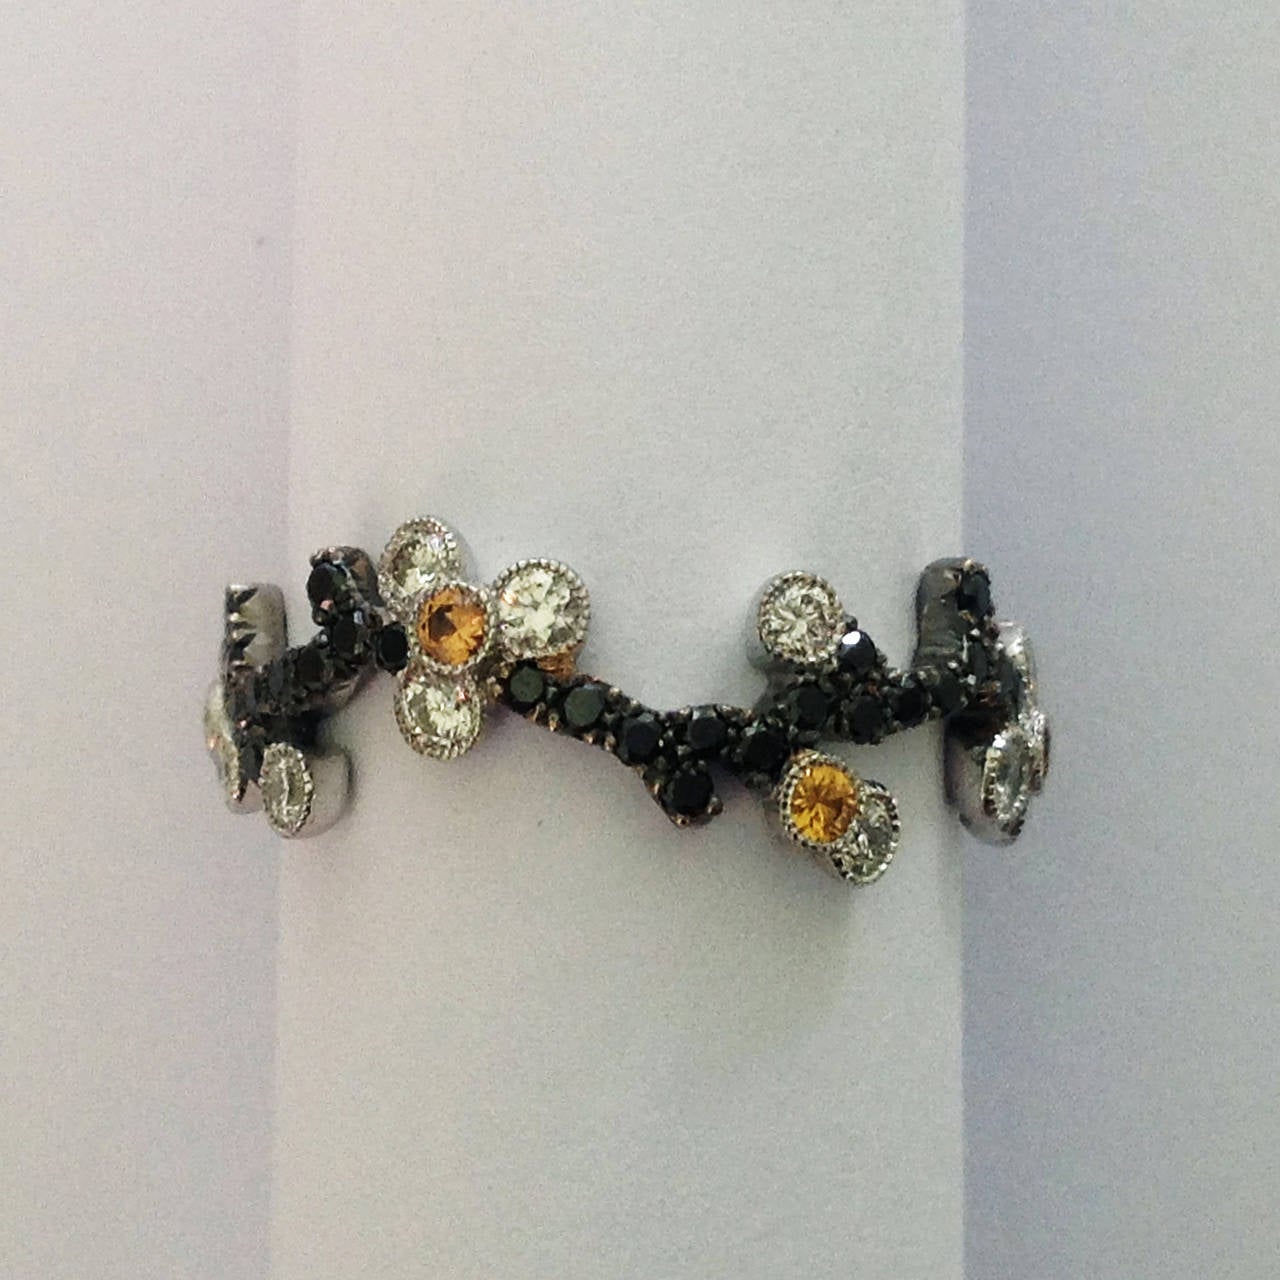 Dalben design diamonds and yellow sapphire Cherry Blossom band ring mounted in 18 kt white gold with 52 round brillant cut black diamonds weight 0,42 carats ,18 round brillant cut white diamonds weight 0,35 carats and 6 round cut yellow sapphires